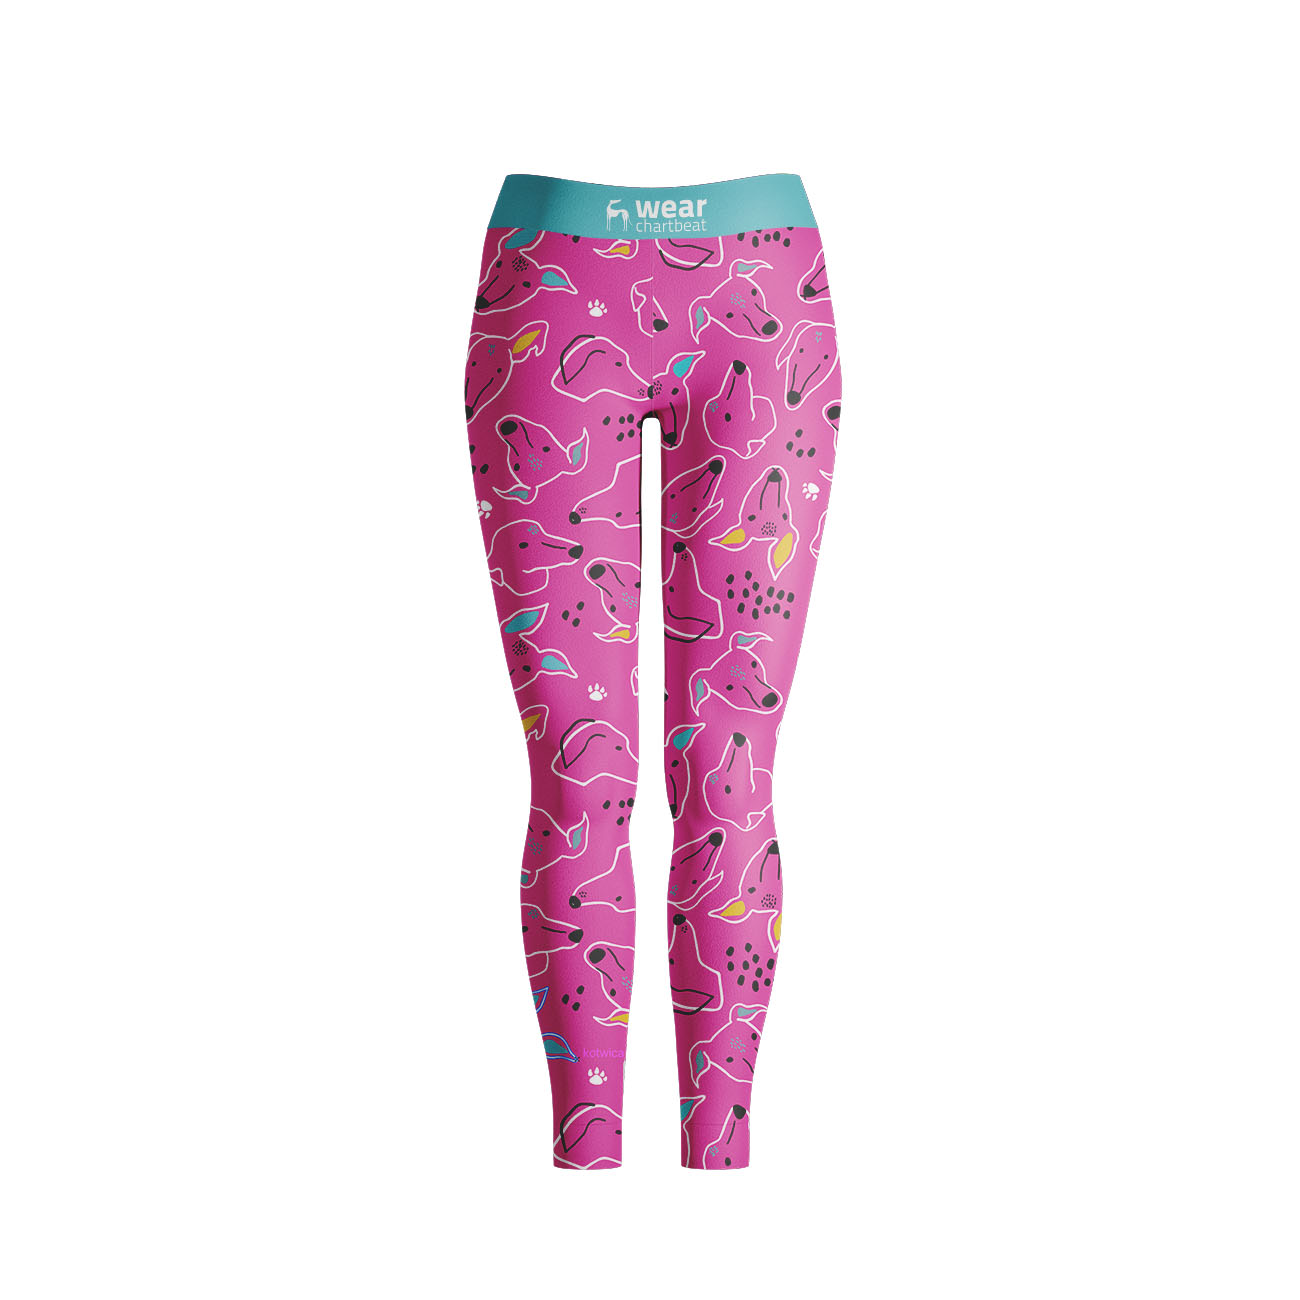 Sighthound leggings SIGHTHIE PINK - Wear.Chartbeat image 1